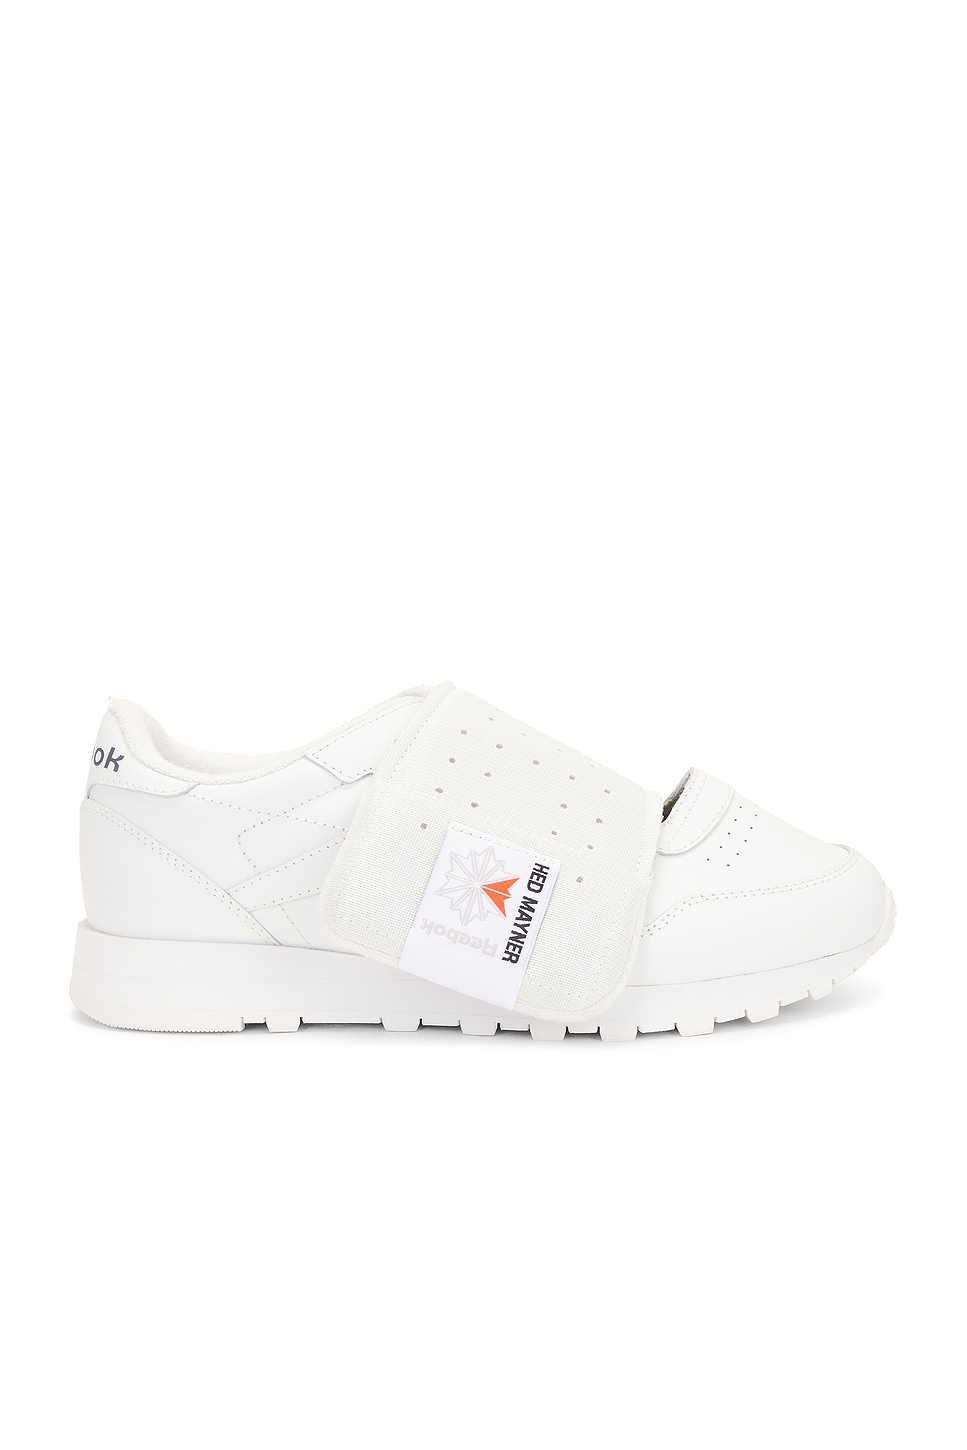 Image 1 of Reebok x Hed Mayner Hed Mayner Classic in White